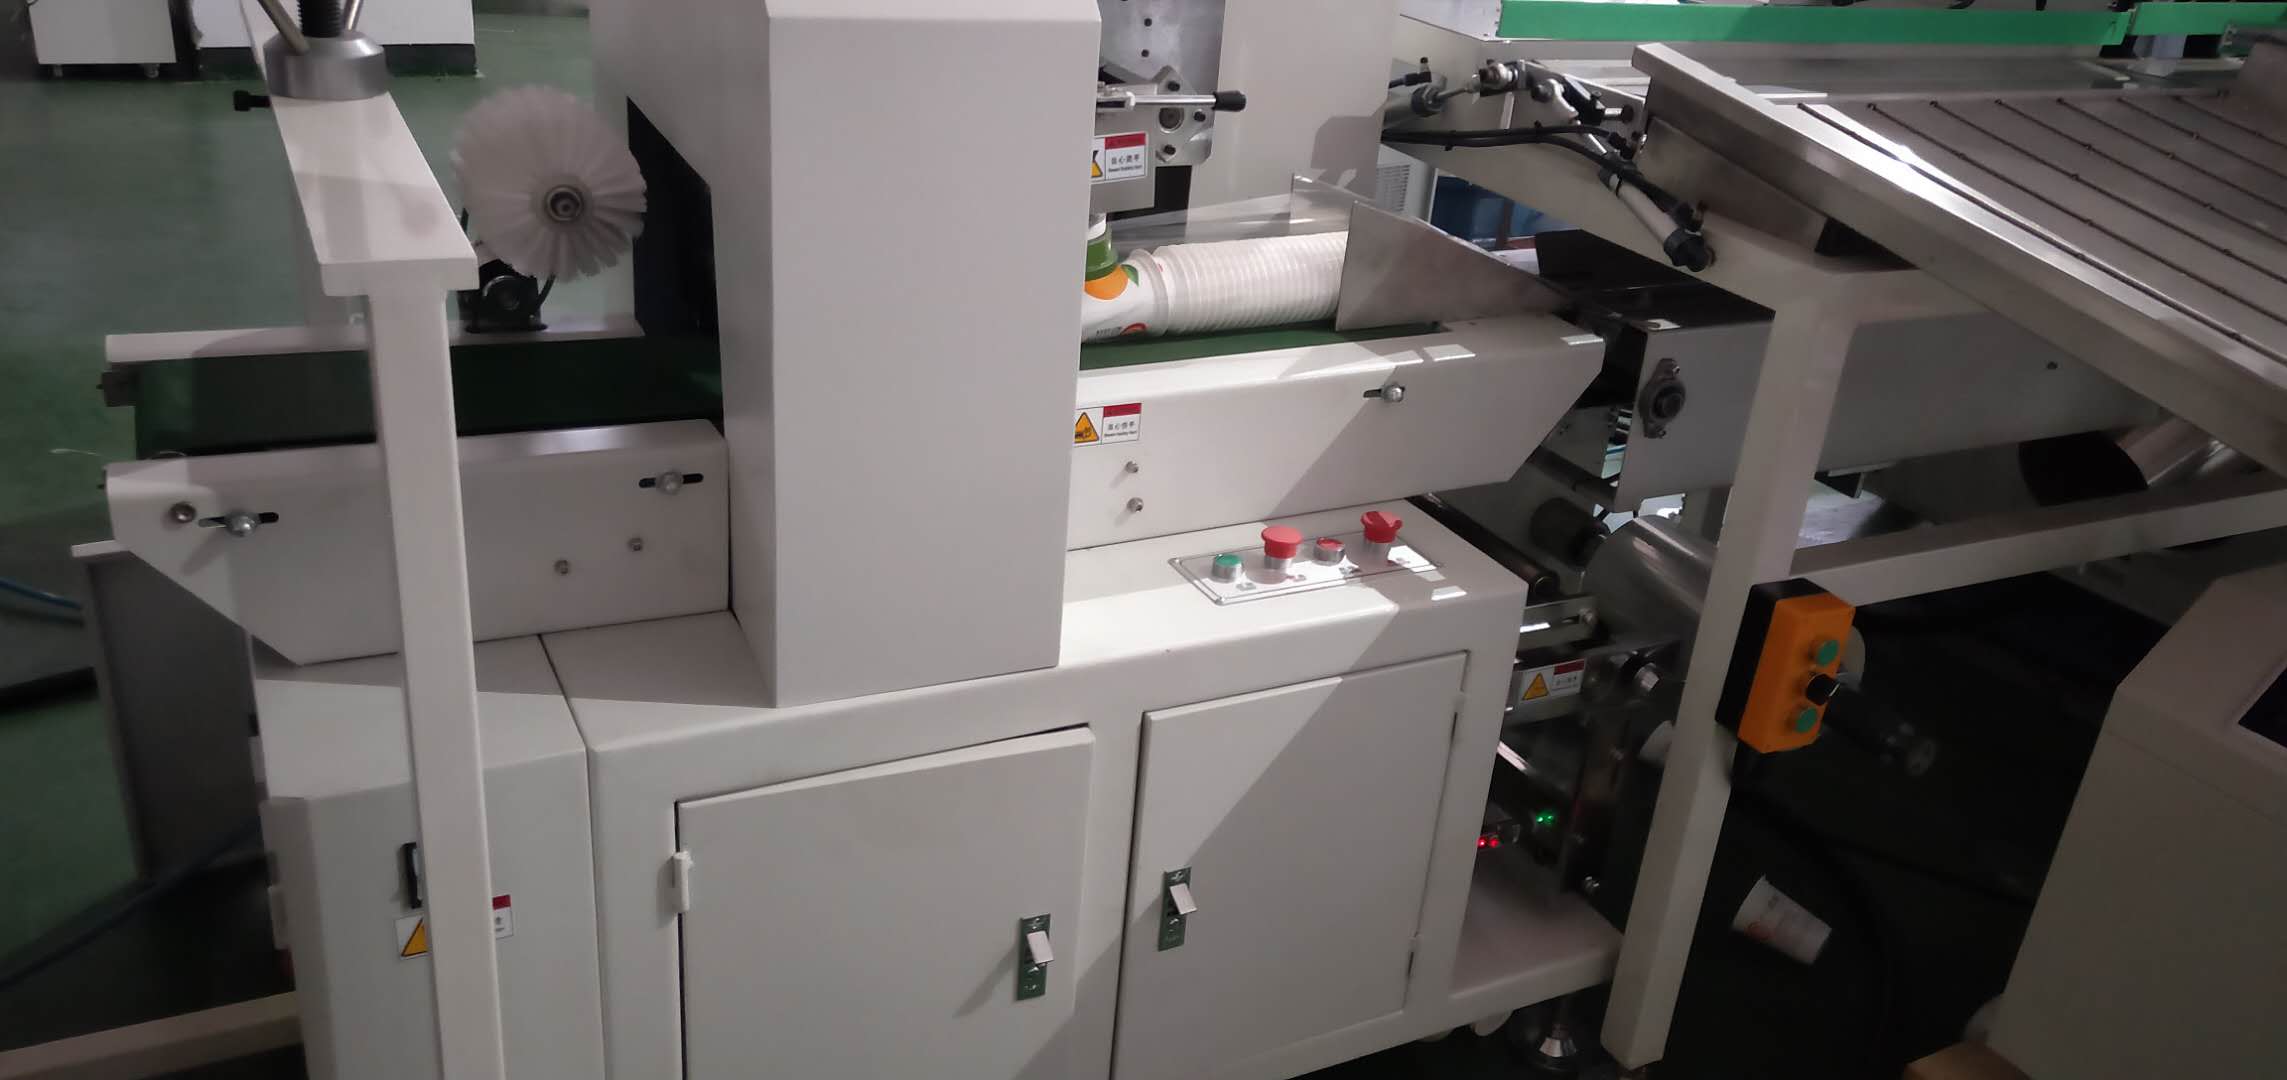 4/6/8-Colour PP, PS Plastic Cup Offset Printing Machine